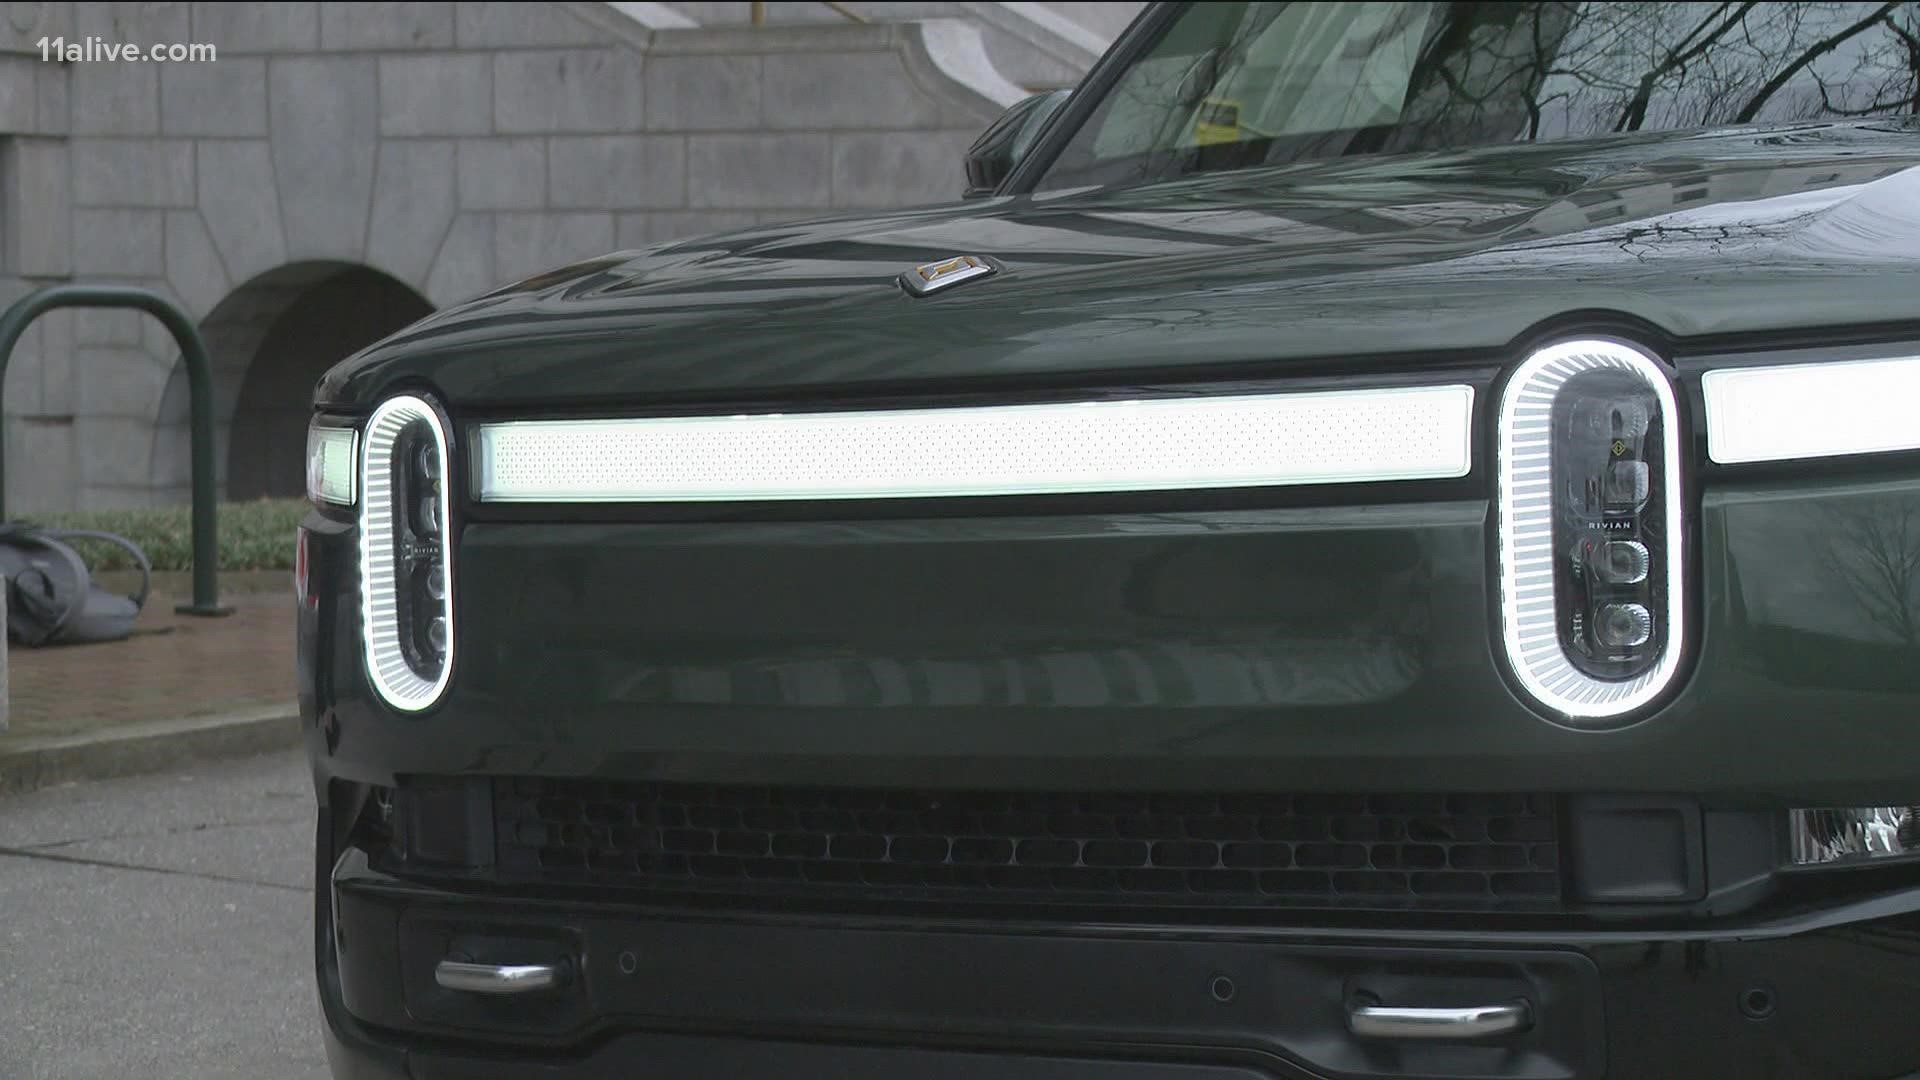 Rivian Automotive makes electric pickup trucks and is eyeballing a site east of Atlanta.